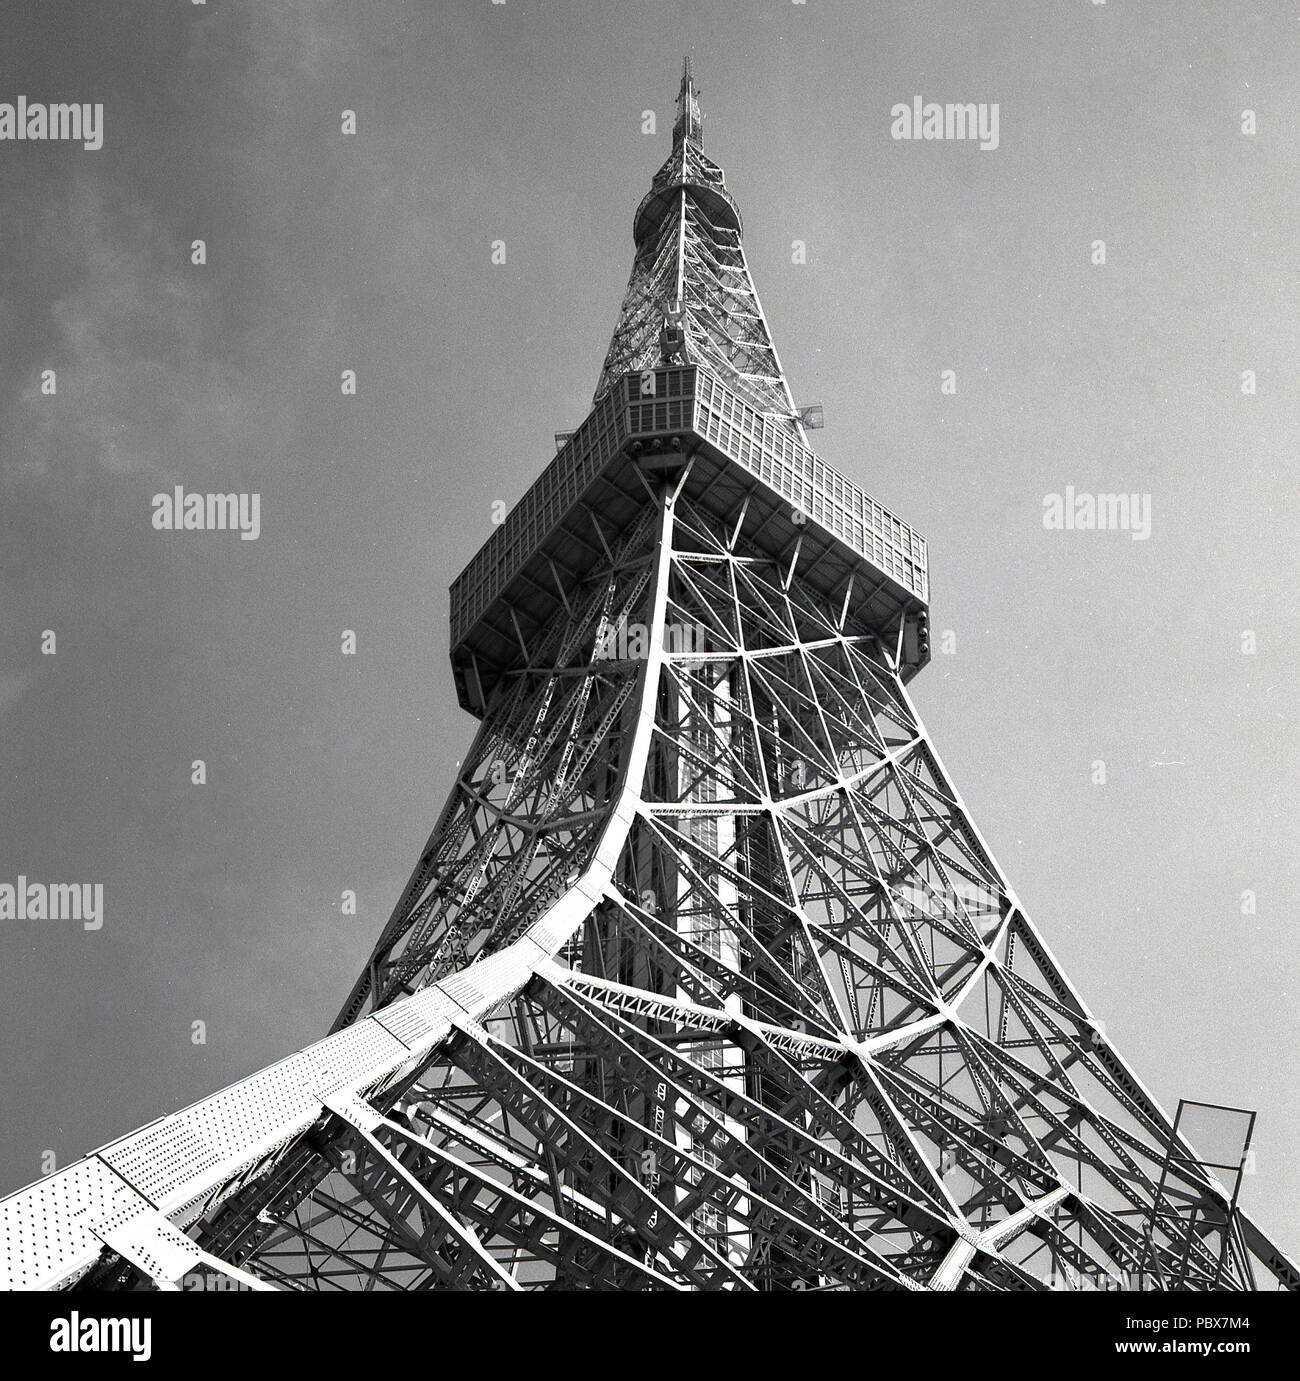 1958, historical, view from below of the recently built Tokyo tower, a tall  - over a 1,000 feet (333 metres) high- telecommunications and observation  tower, Tokyo, Japan. A steel lattice towe, based